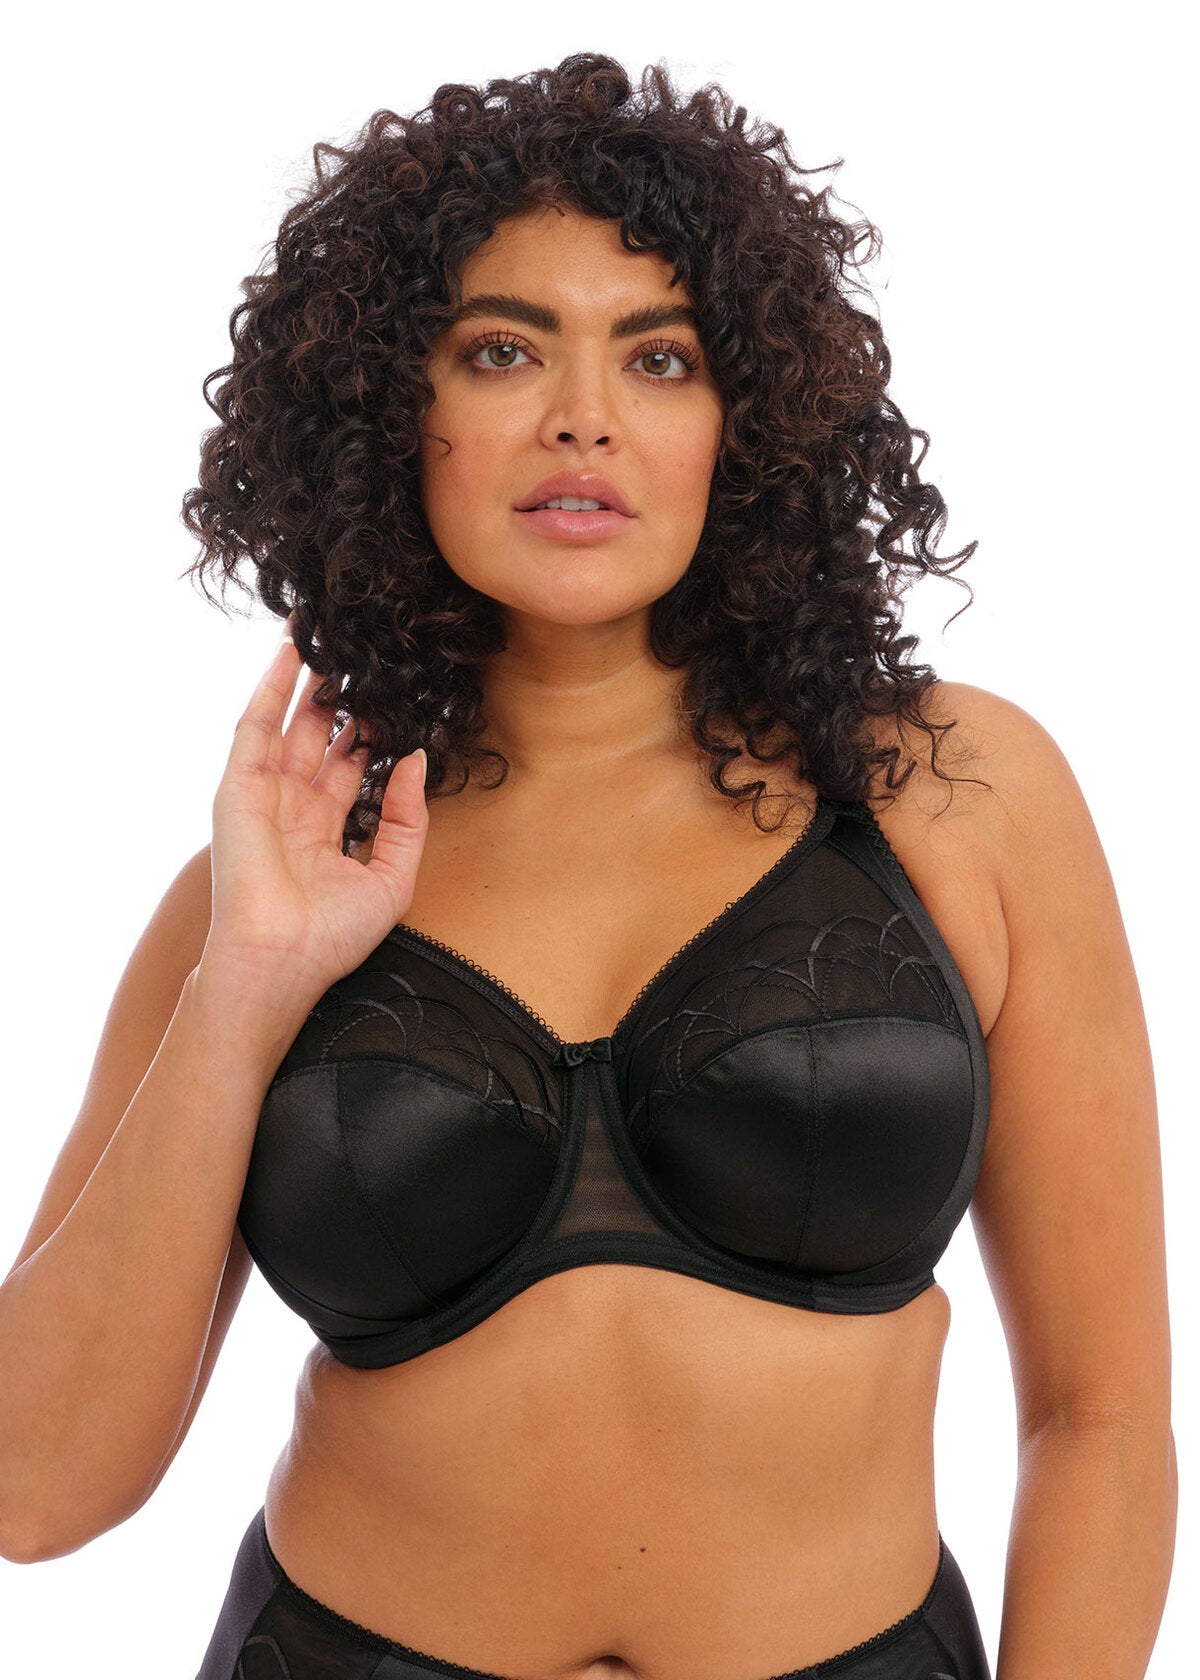 Elomi Cate Soft Cup Bra Style 4033-WHE